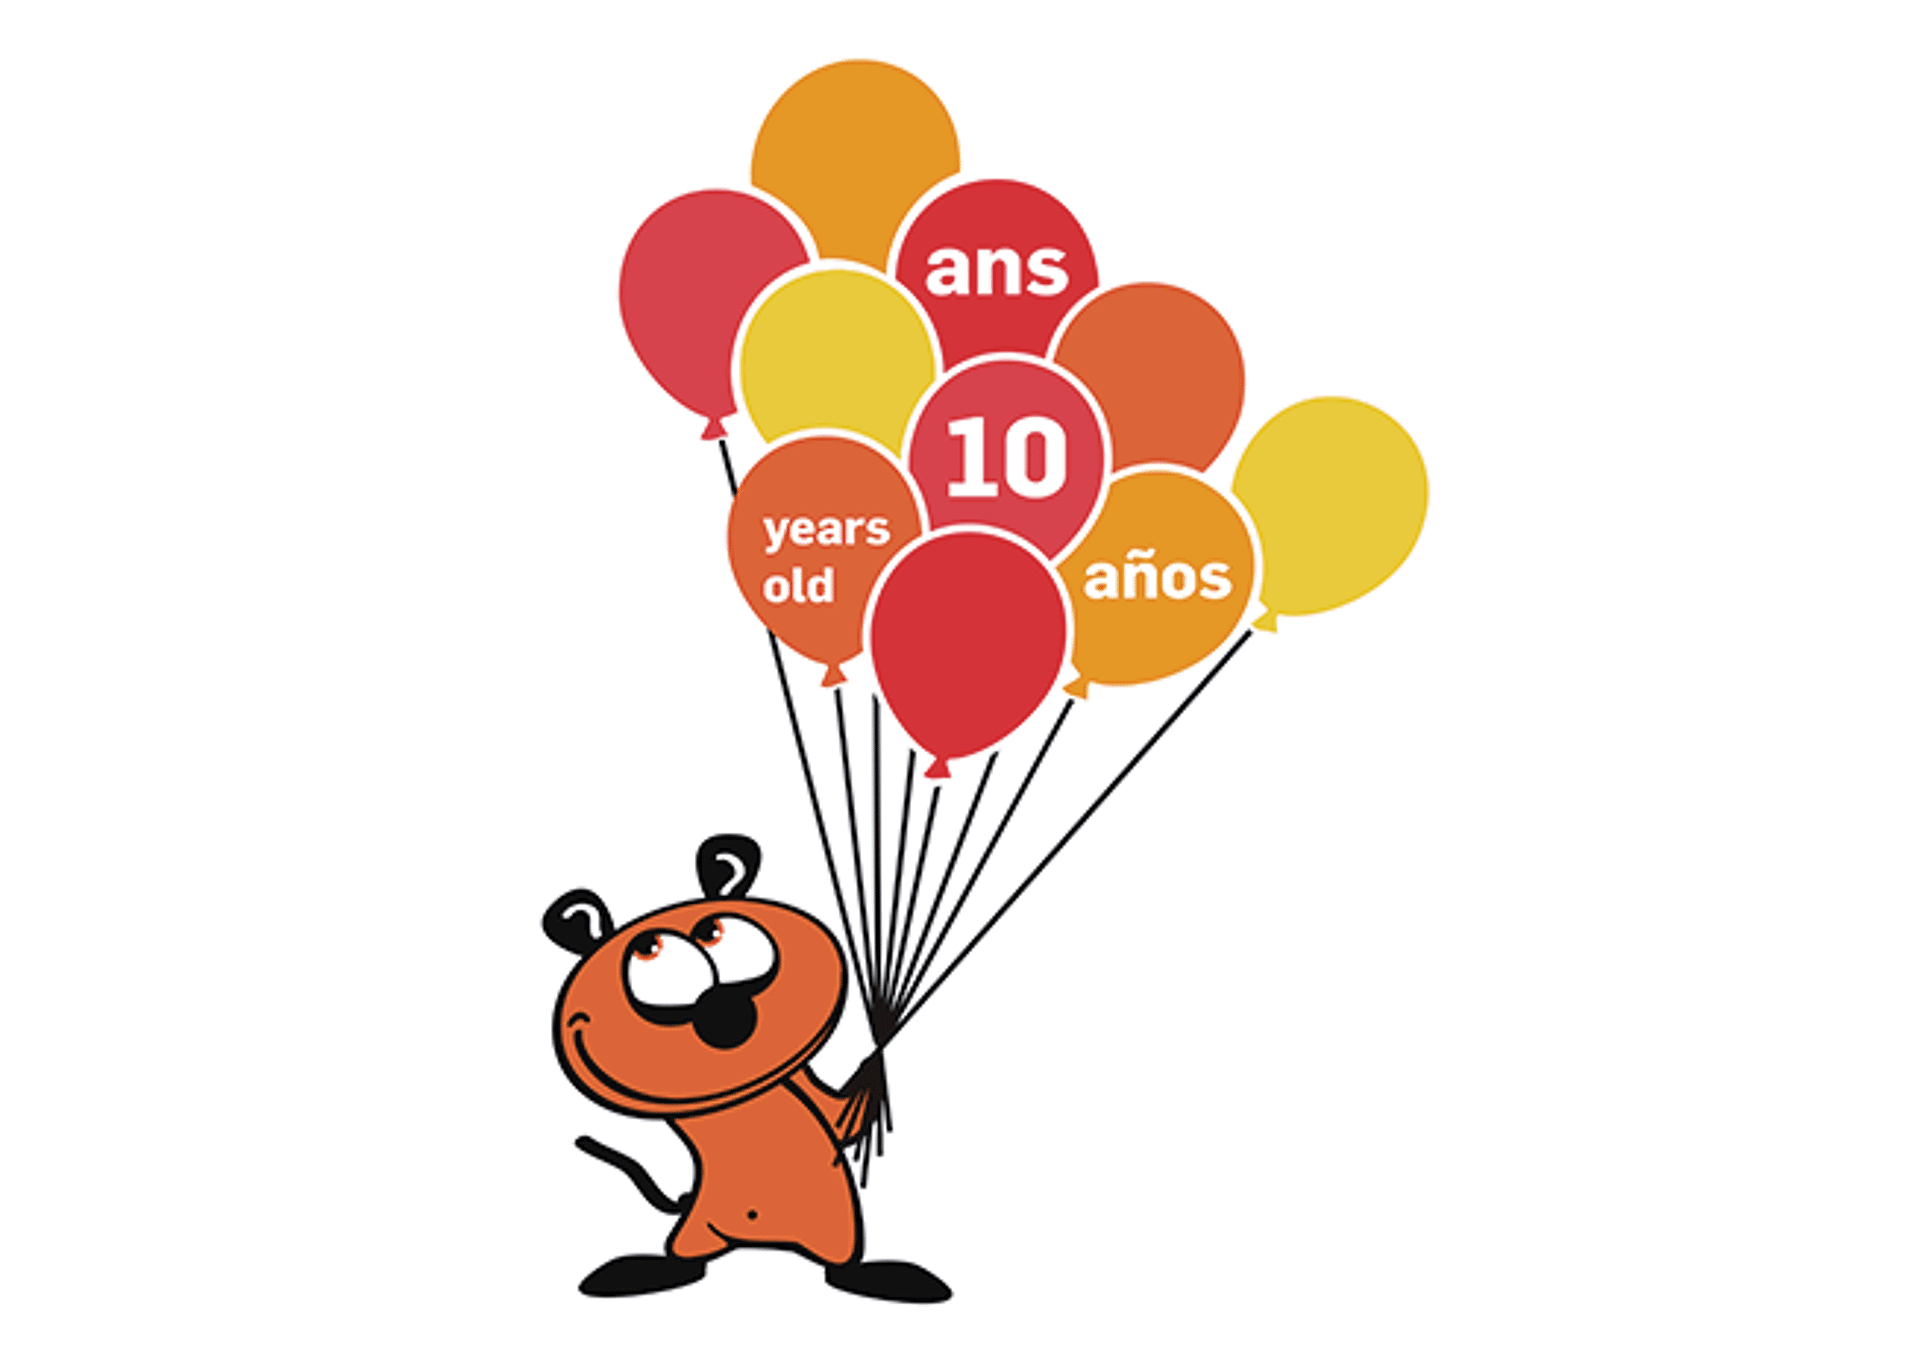 A cartoon character holding balloons with the number 10 and the words 'years old', 'ans', and 'años'.